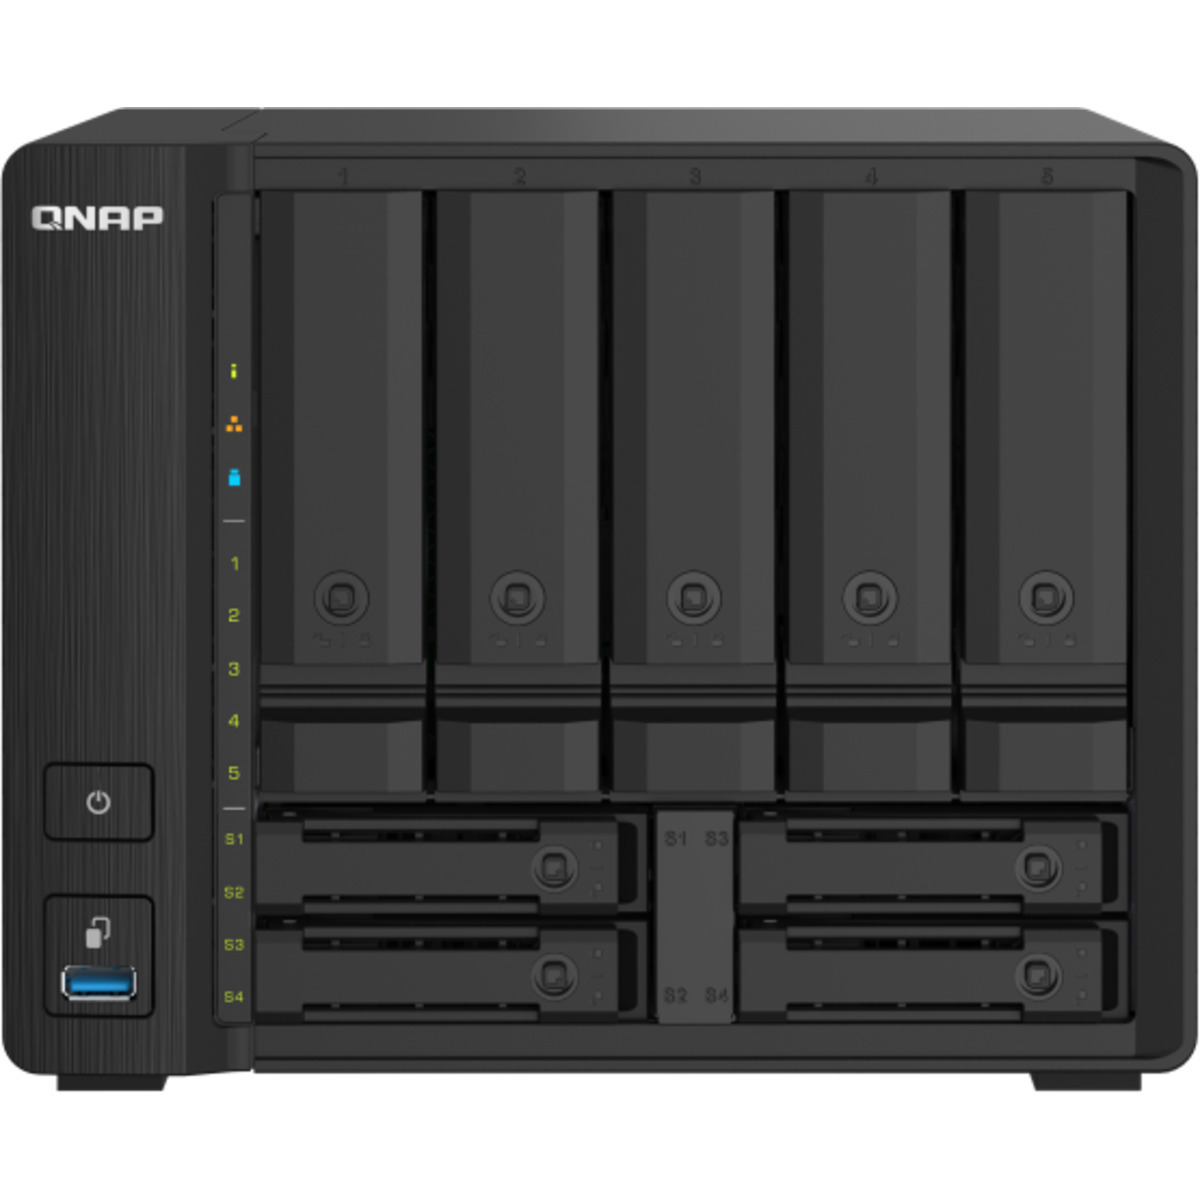 QNAP TS-932PX 2tb 5+4-Bay Desktop Multimedia / Power User / Business NAS - Network Attached Storage Device 4x500gb Western Digital Red SA500 WDS500G1R0A 2.5 560/530MB/s SATA 6Gb/s SSD NAS Class Drives Installed - Burn-In Tested - FREE RAM UPGRADE TS-932PX